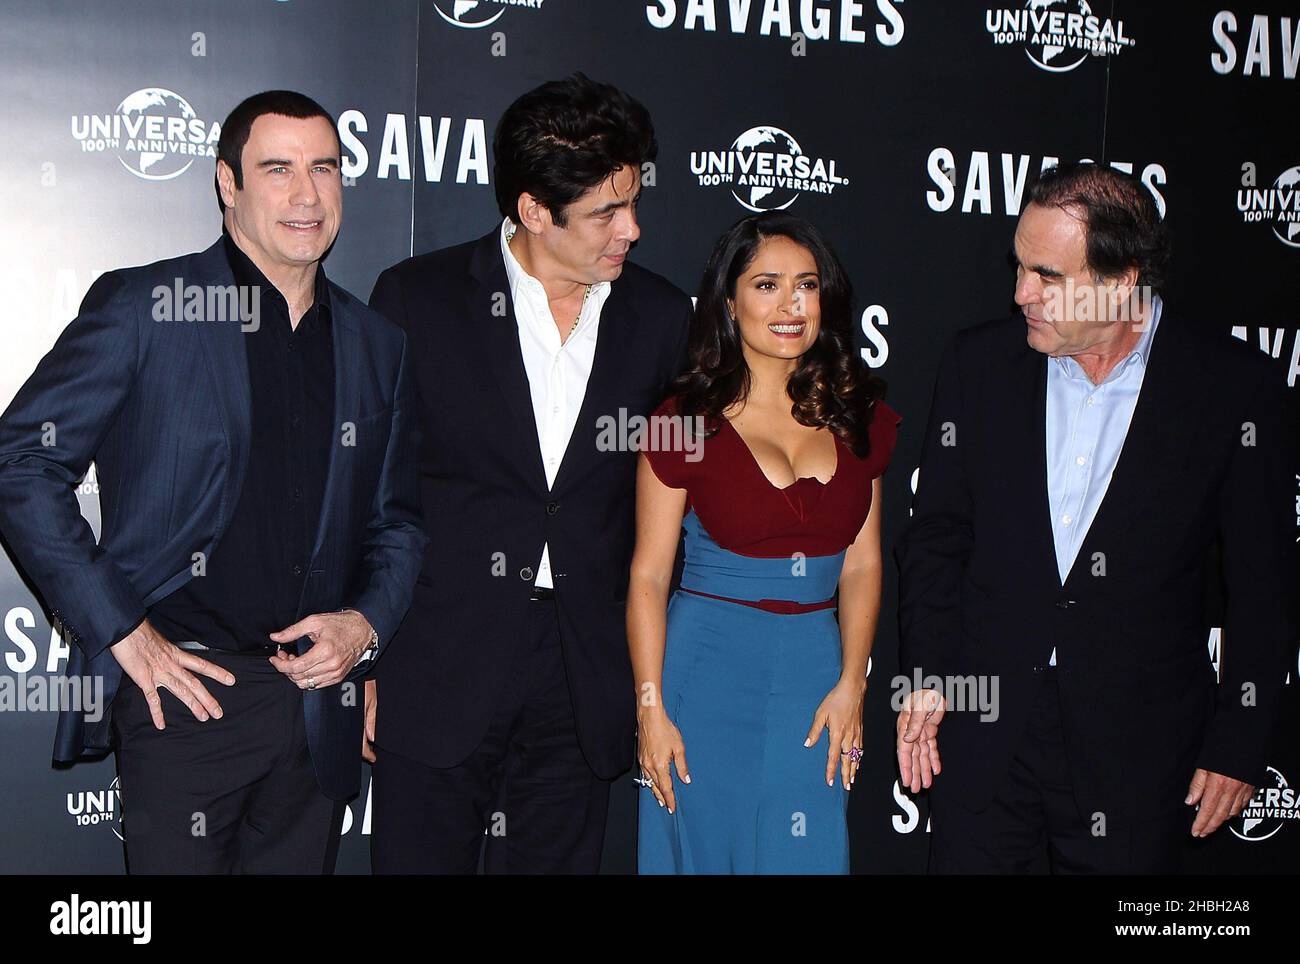 (L-R)John Travolta, Benicio Del Toro,Salma Hayek and Oliver Stone seen at a Photocall for upcoming UK cinema release Savages at The Oriental Mandarin Hotel in London. Stock Photo